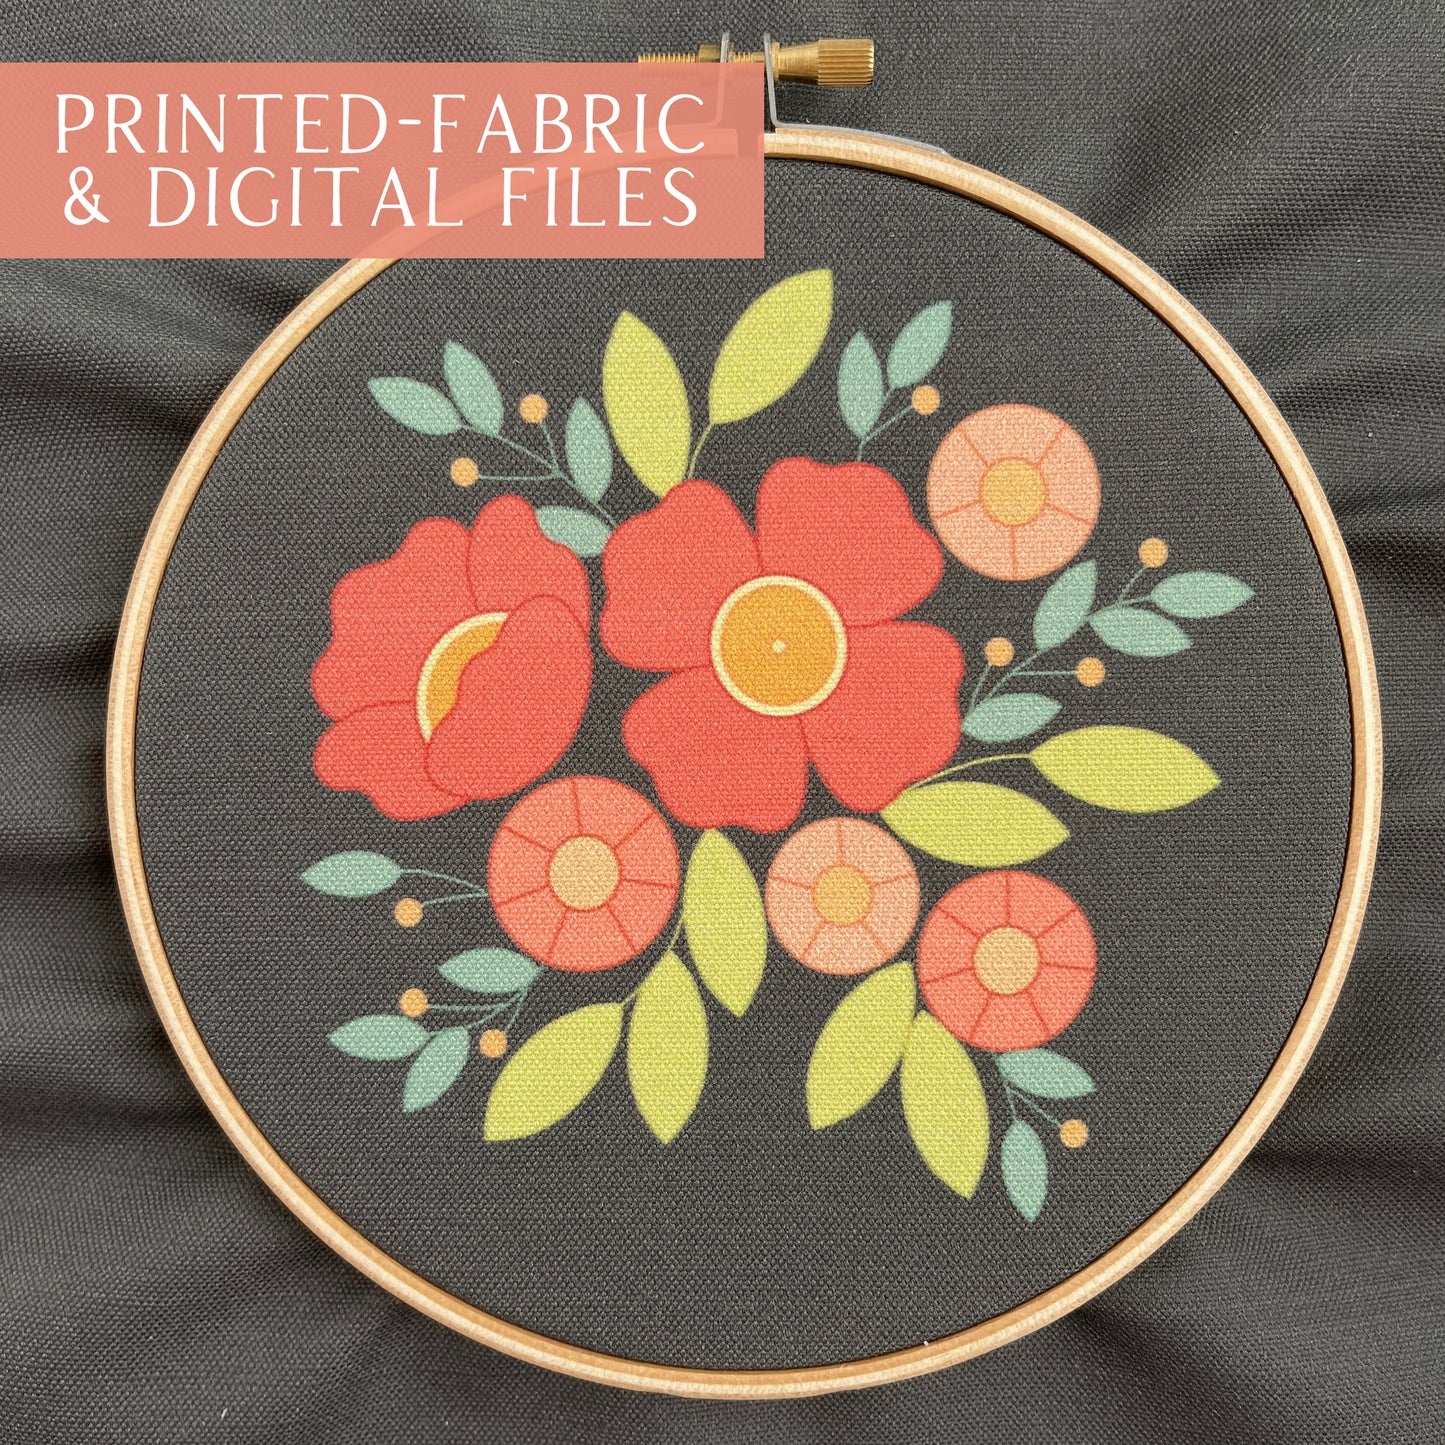 Folky Florals Embroidery Kit - 6 inch project